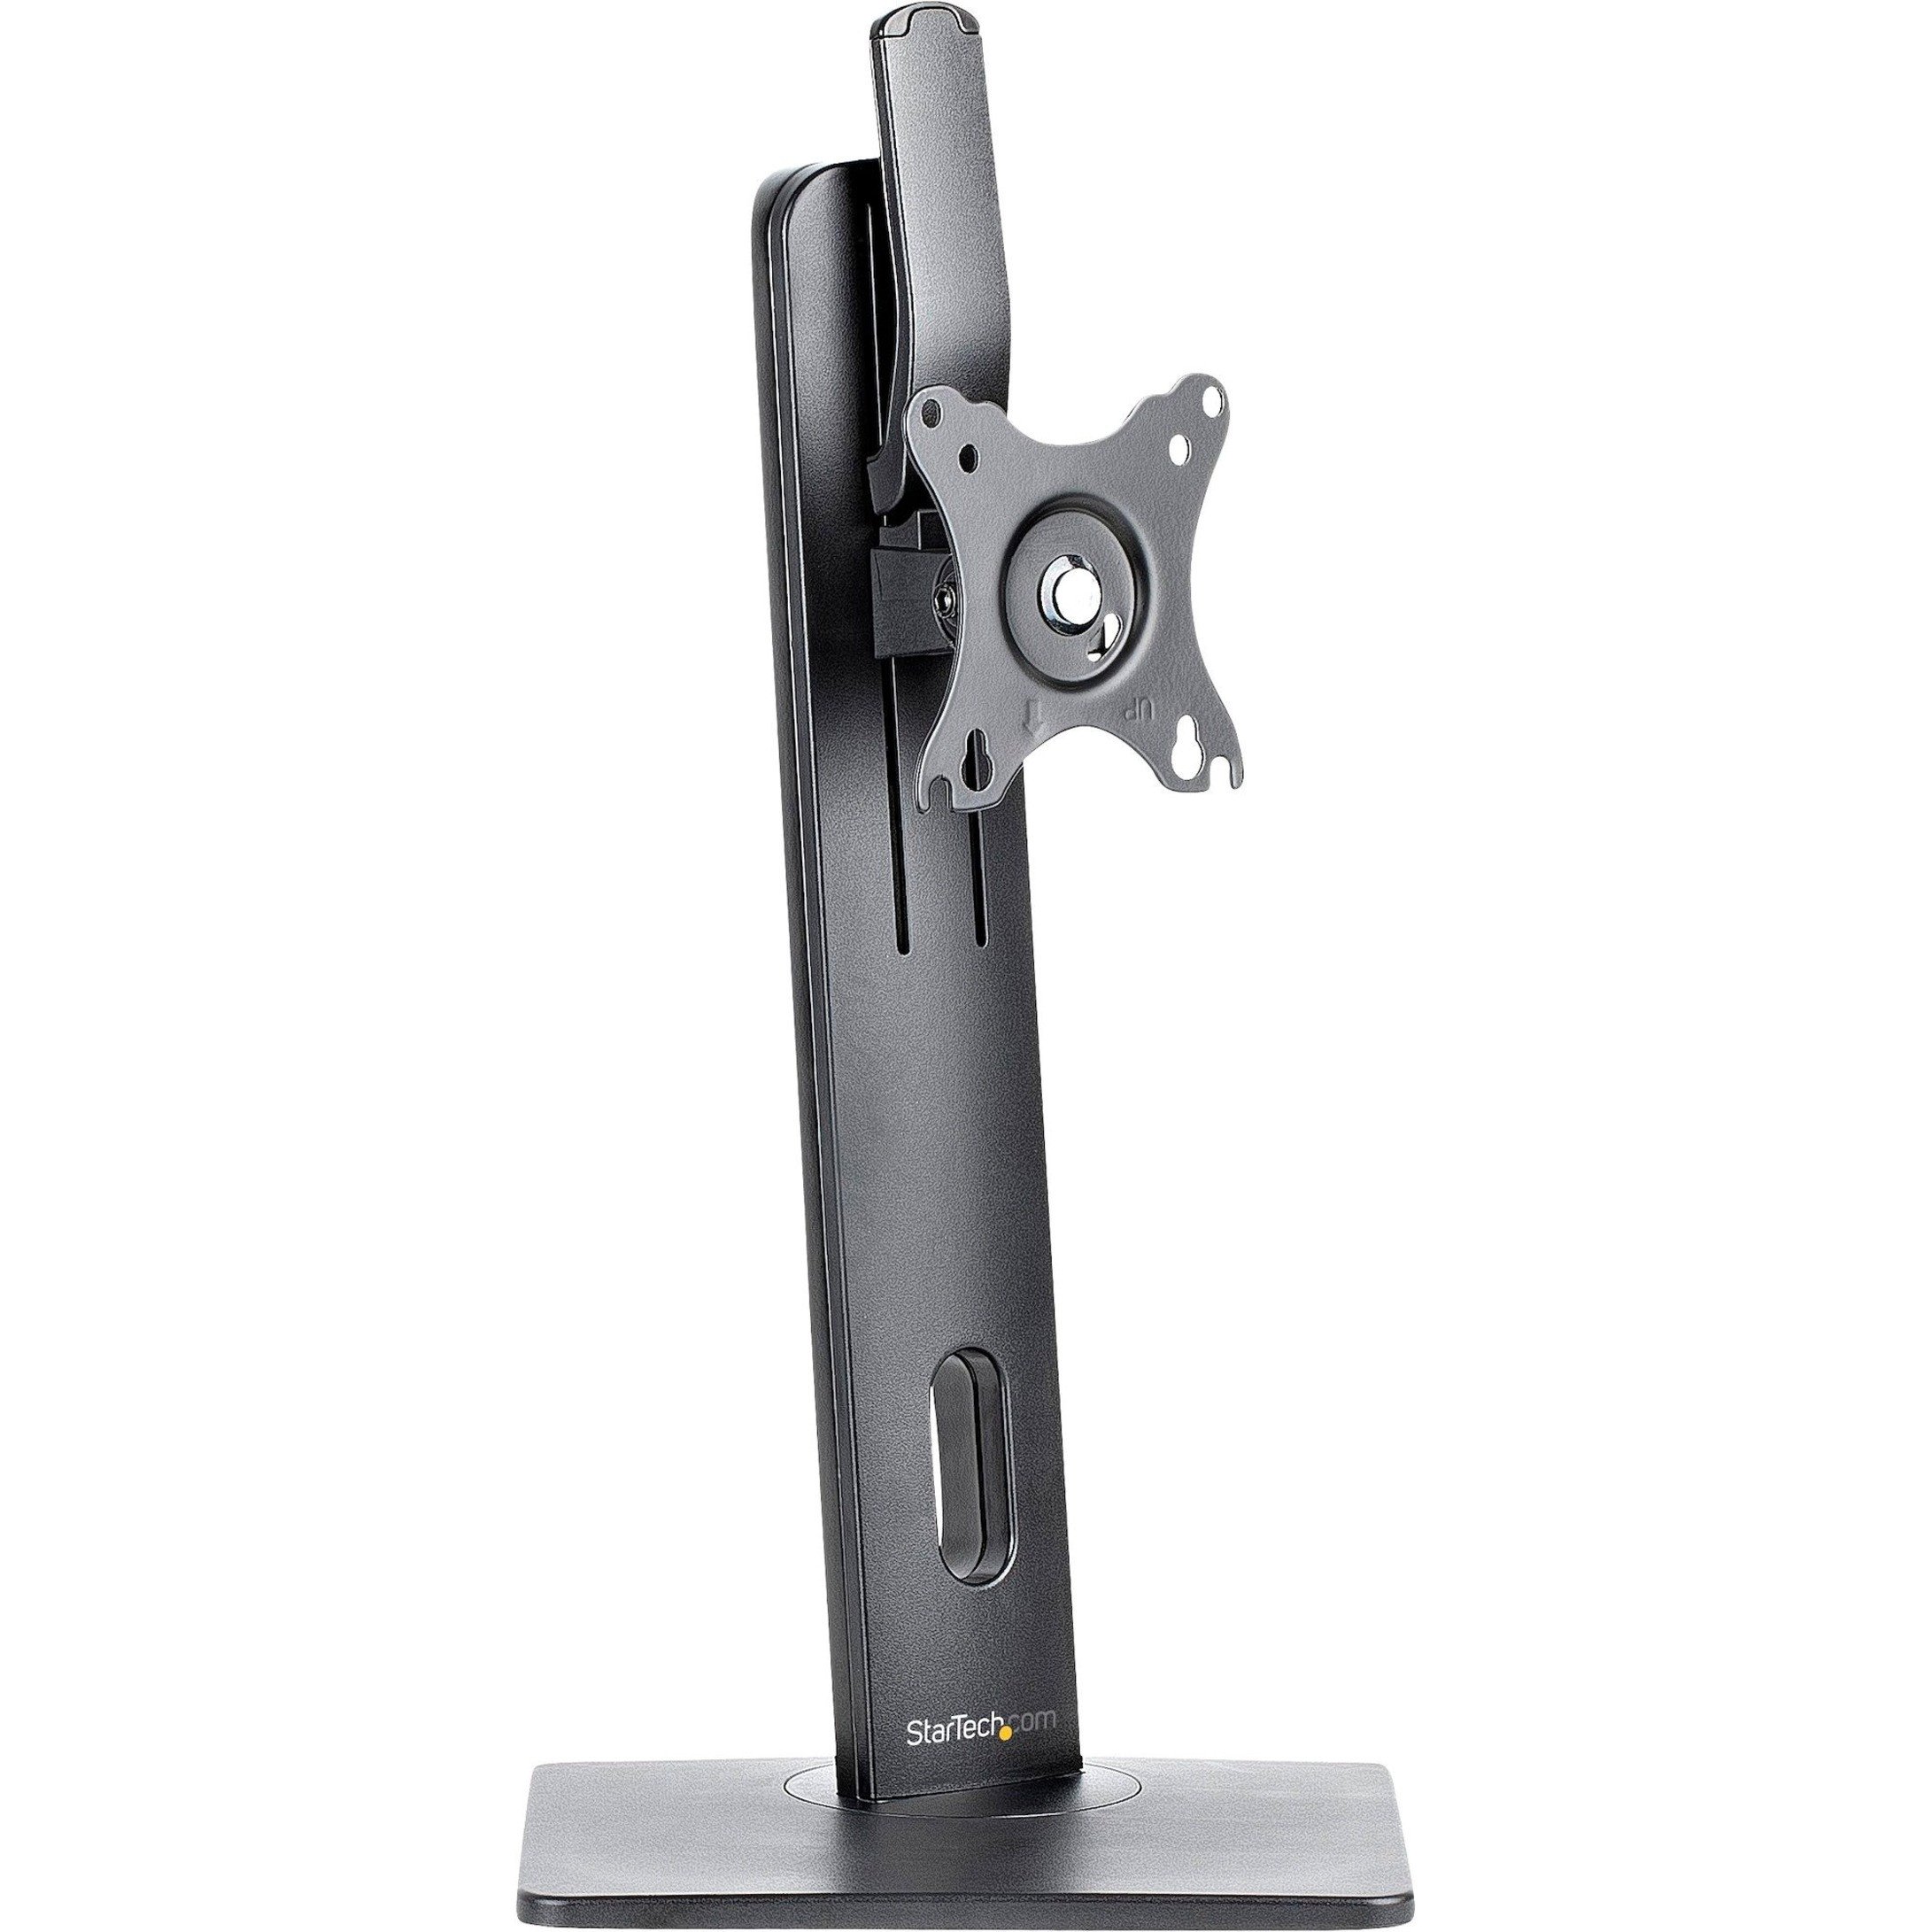 Four Monitor Stand - Freestanding, 5 Years Warranty (4MSFB 2.0)